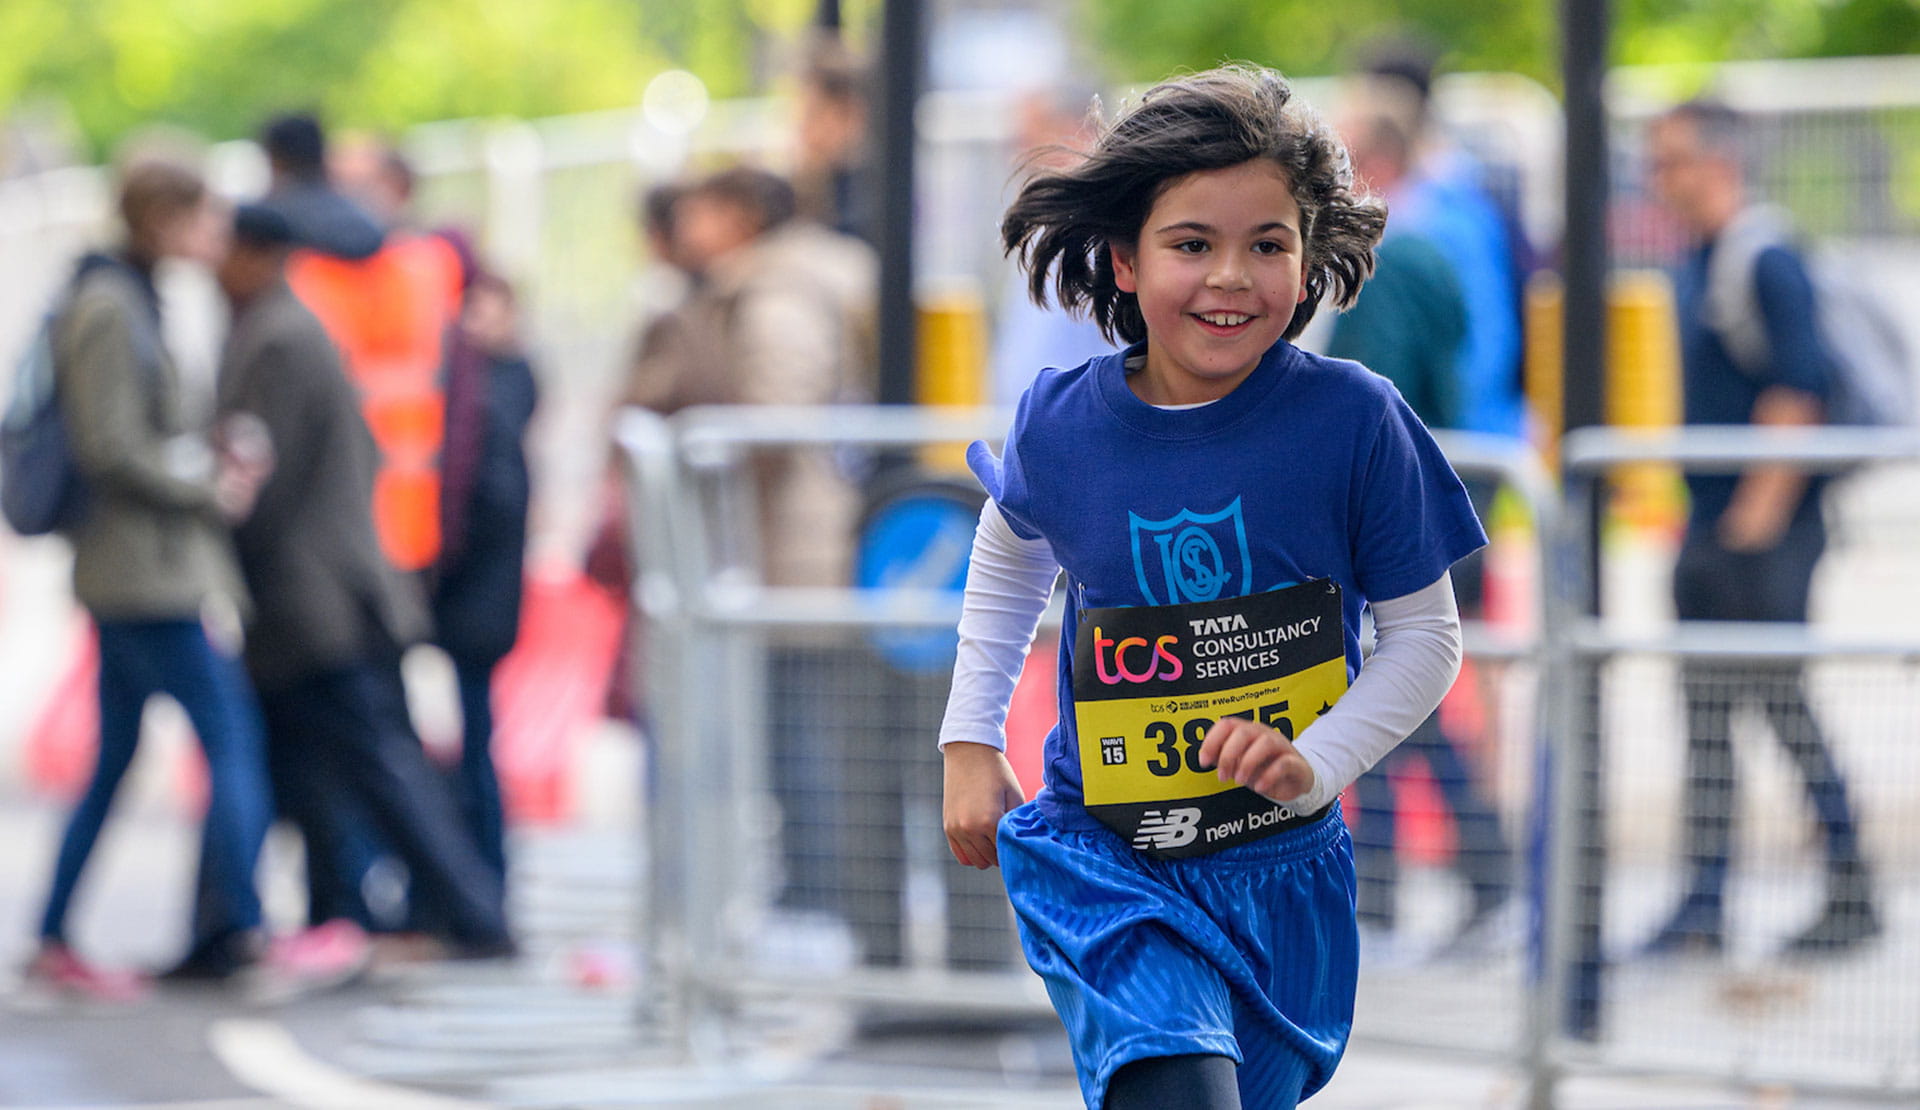 A young competitor in the race runs down The Mall during The TCS Mini London Marathon on Saturday 1st October 2022